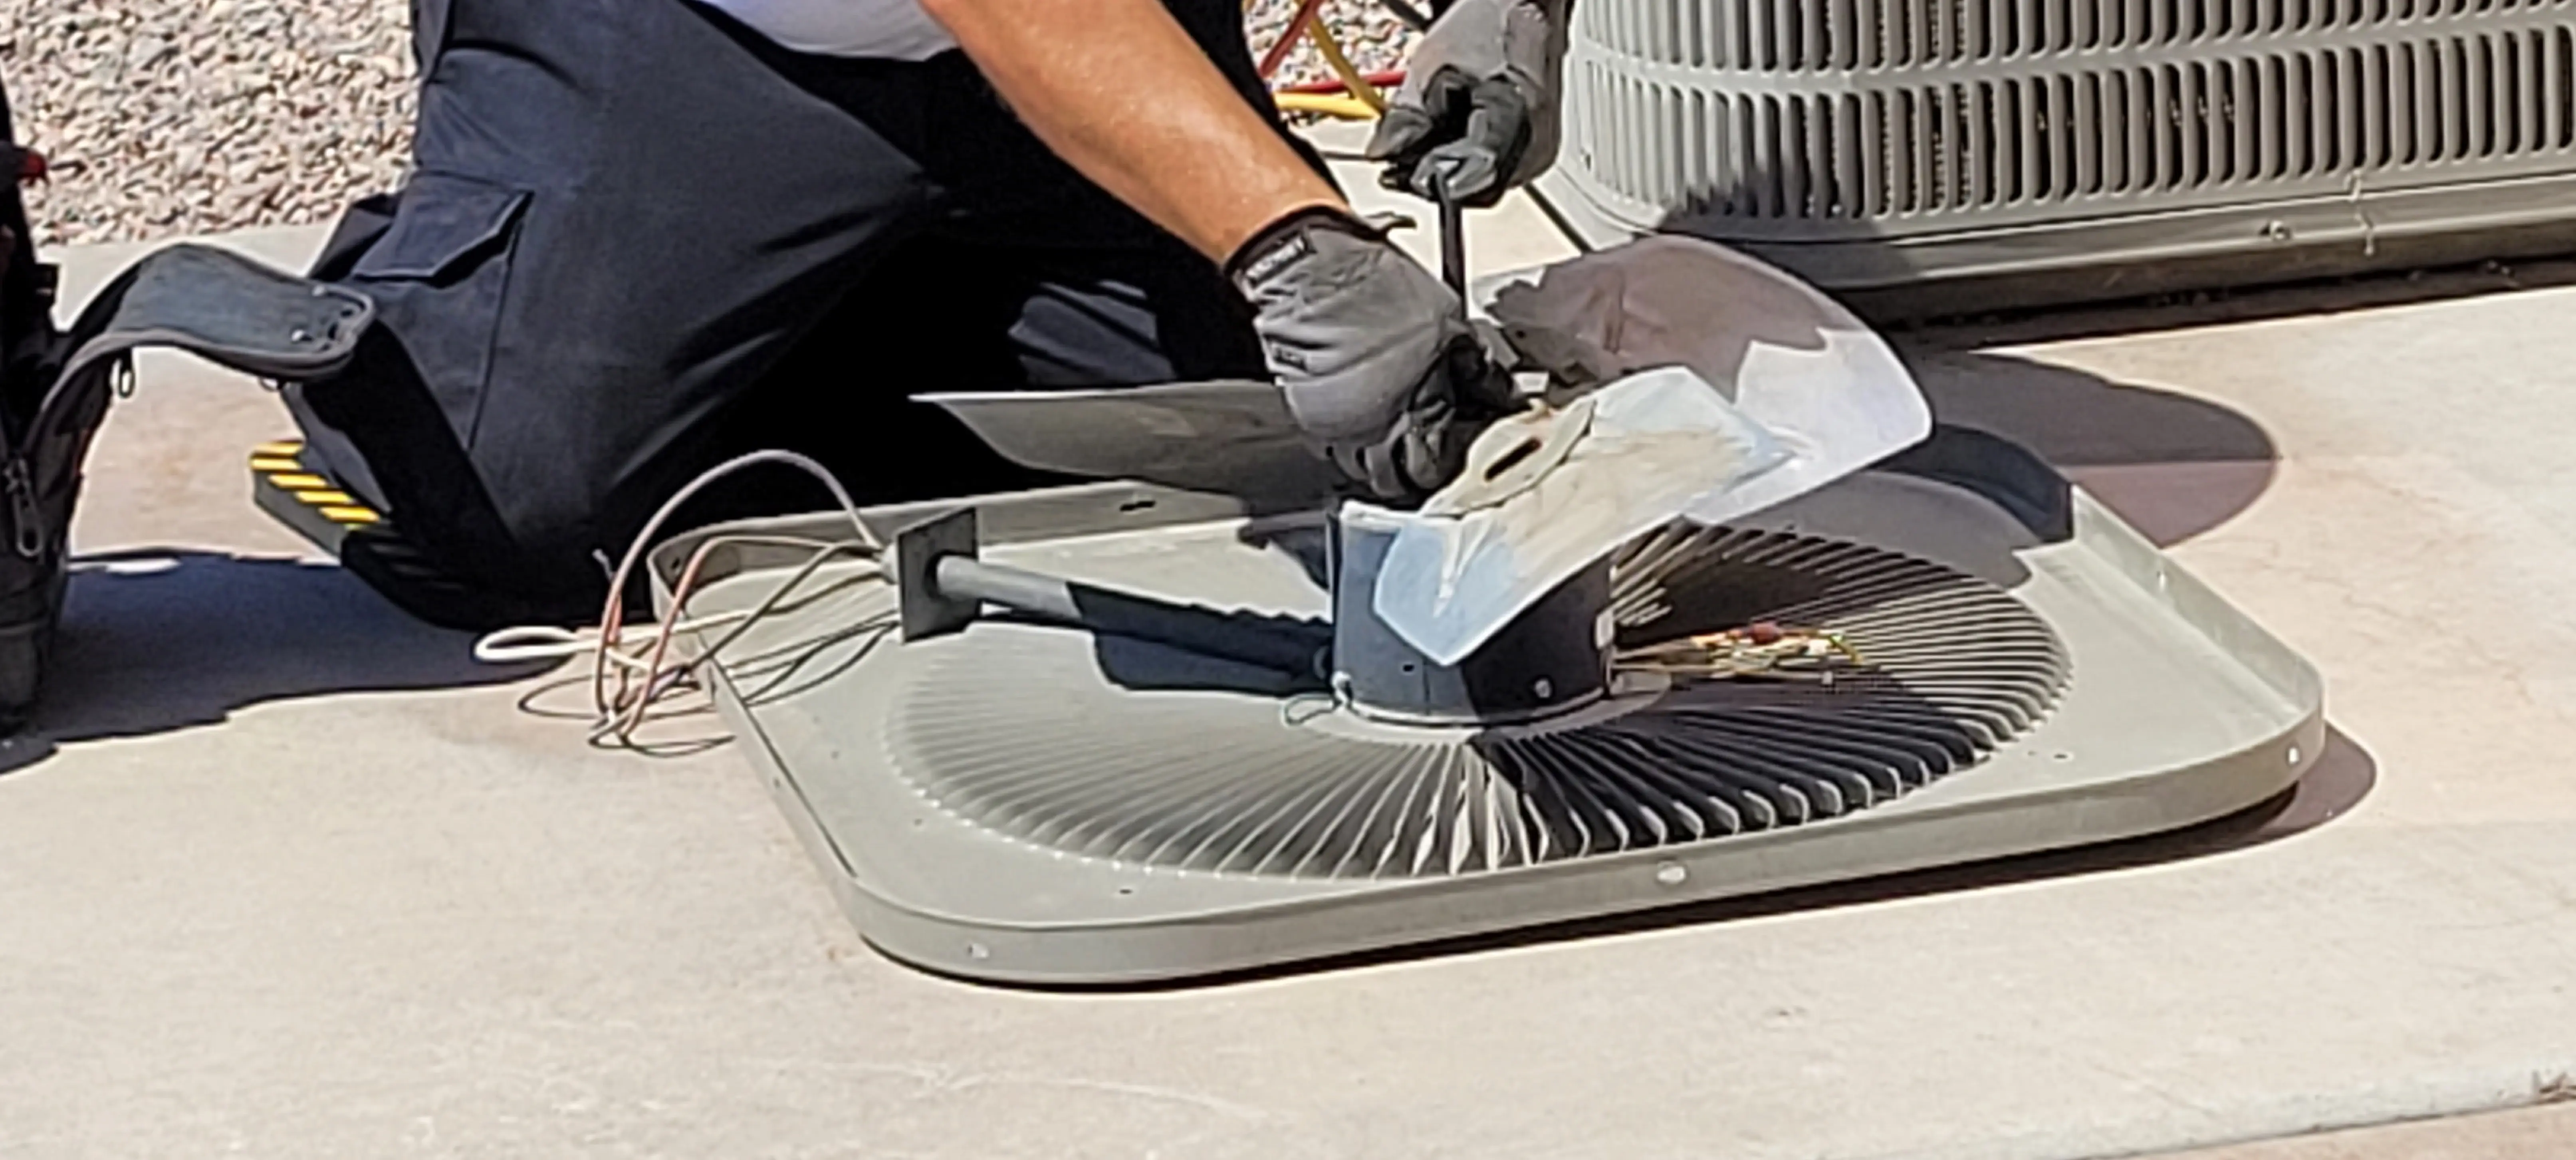 Air-Conditioning-Repair--in-Spring-Branch-Texas-Air-Conditioning-Repair-4296816-image